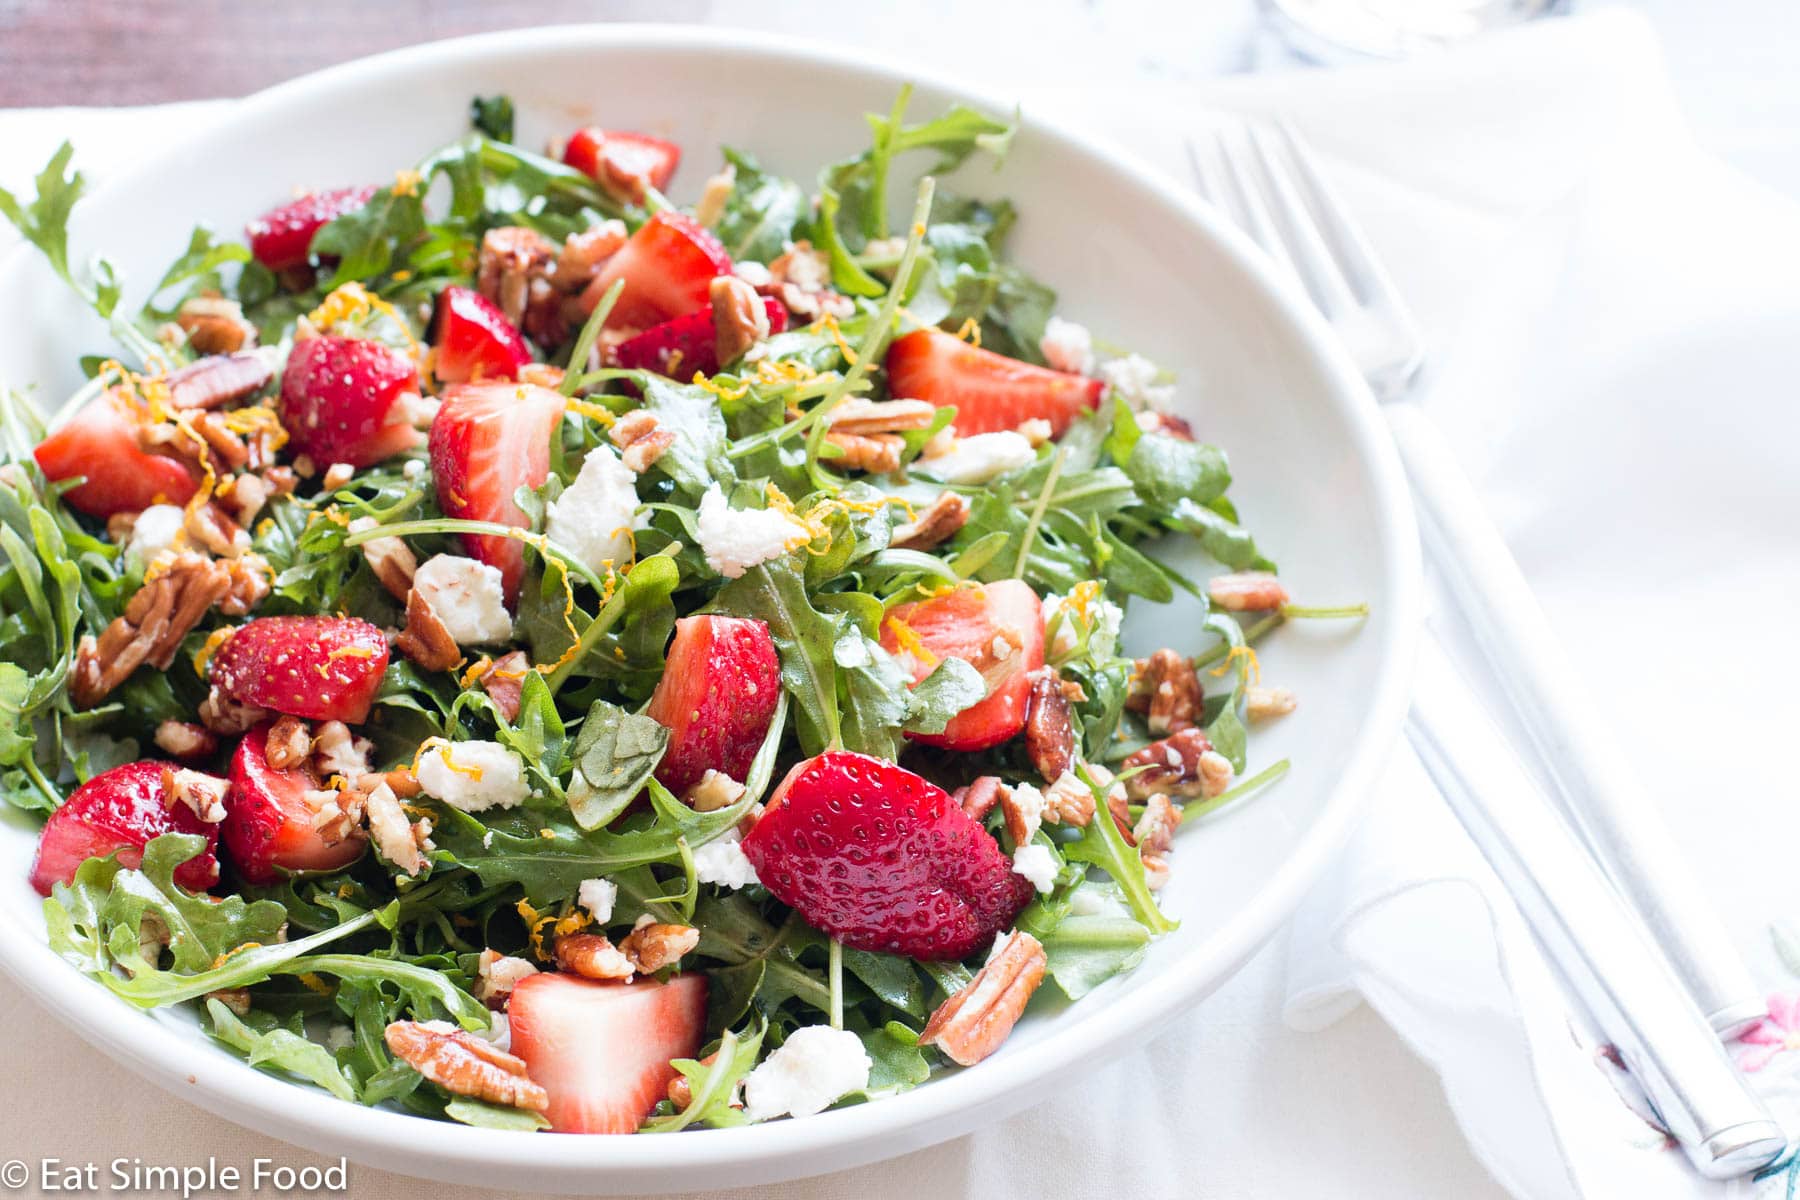 quartered strawberries, chopped pecans, and crumbled goat cheese on arugula salad on a shallow bowl/plate.